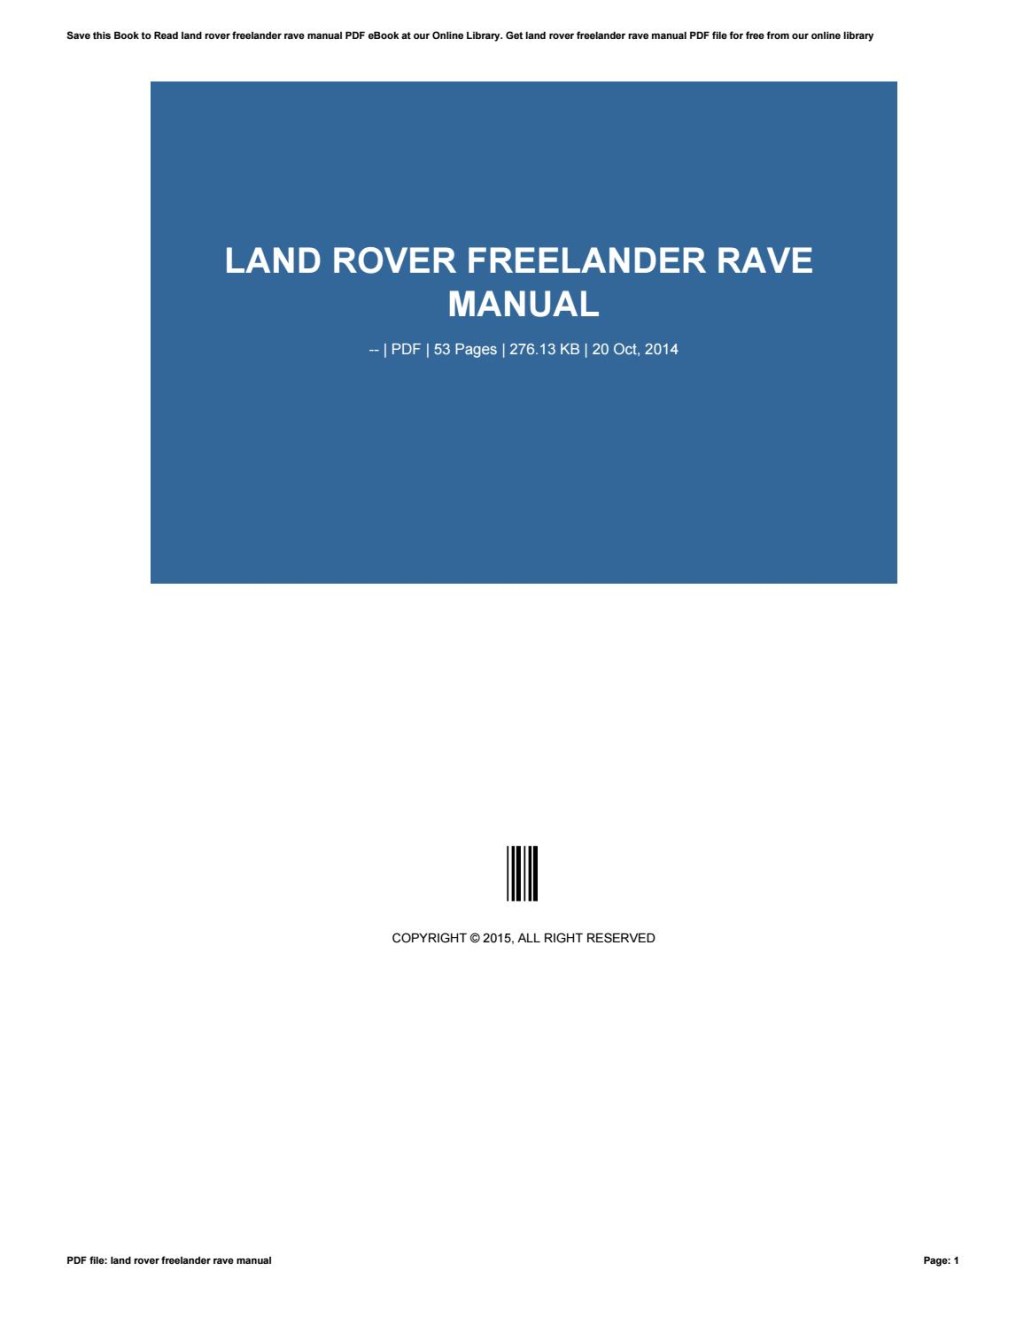 Picture of: Land rover freelander rave manual by gotimes – Issuu